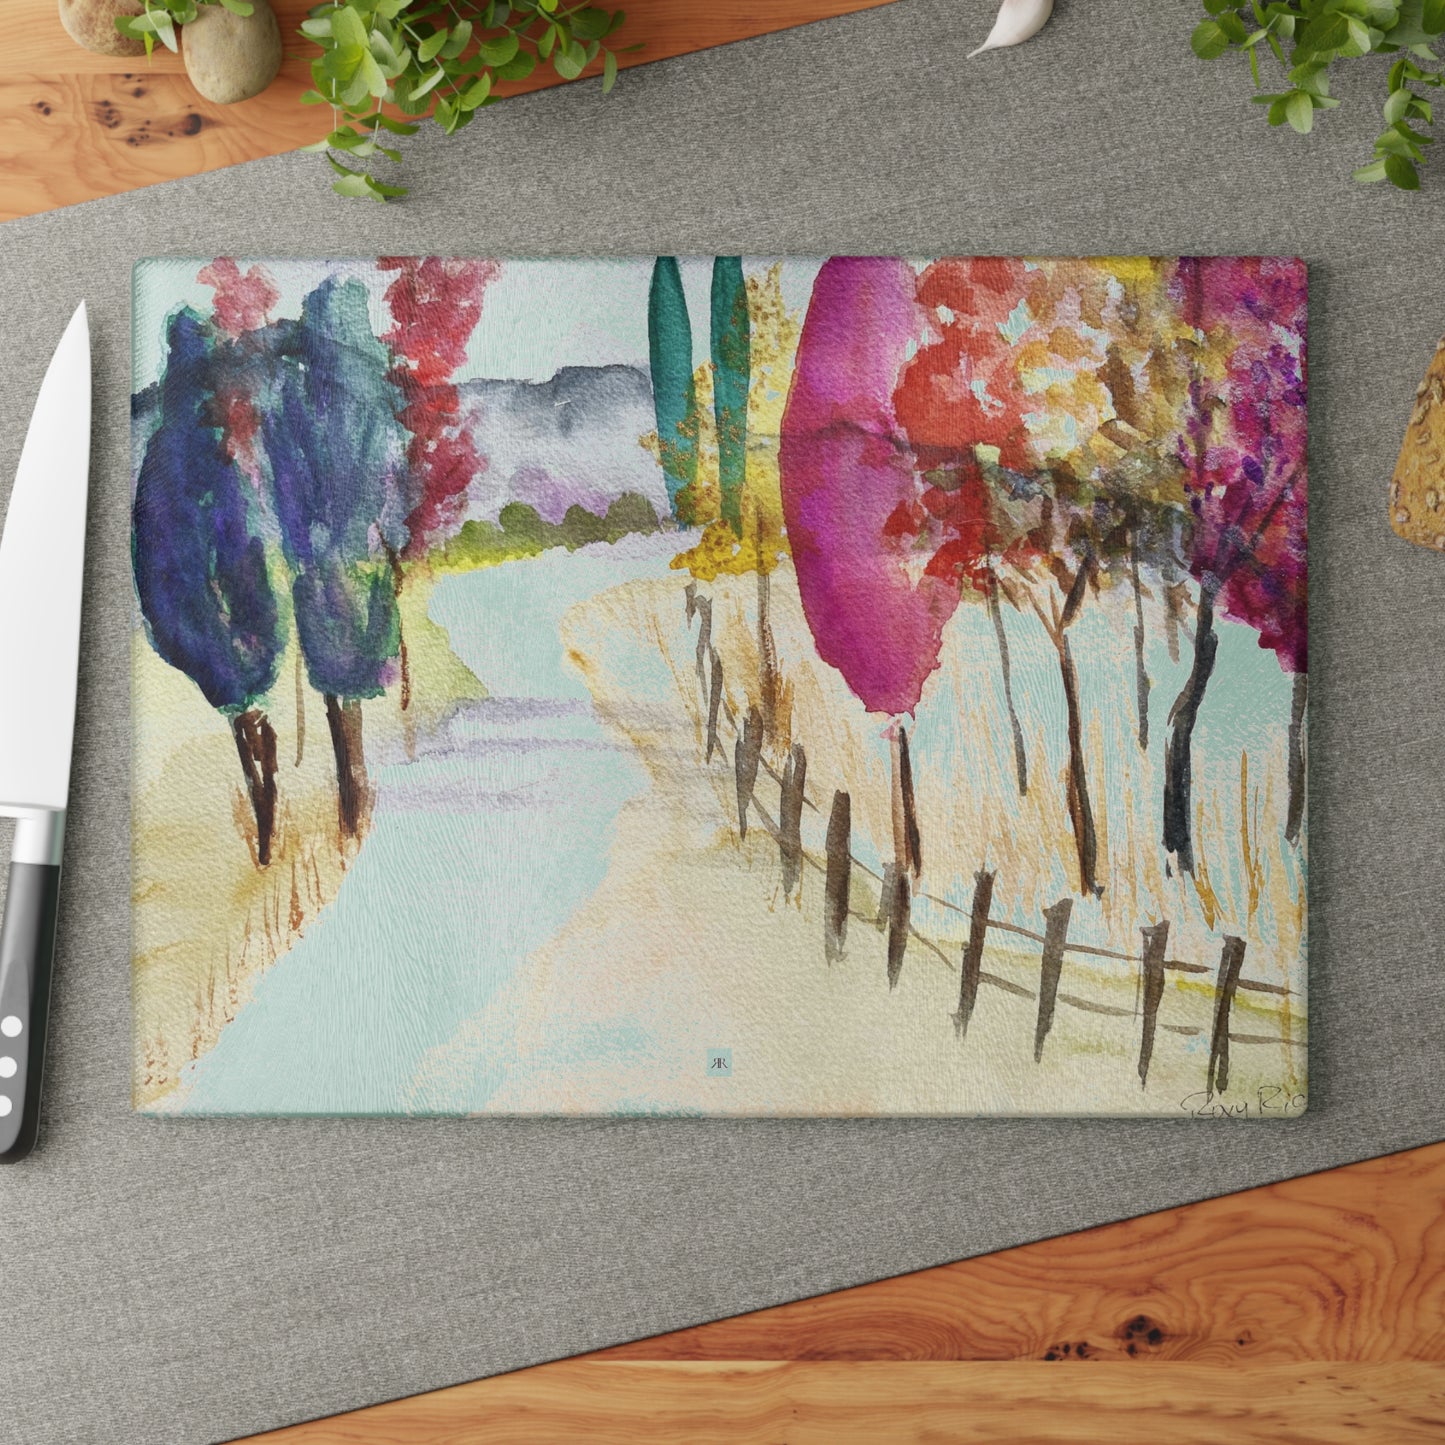 Whimsical Trees Landscape Glass Cutting Board